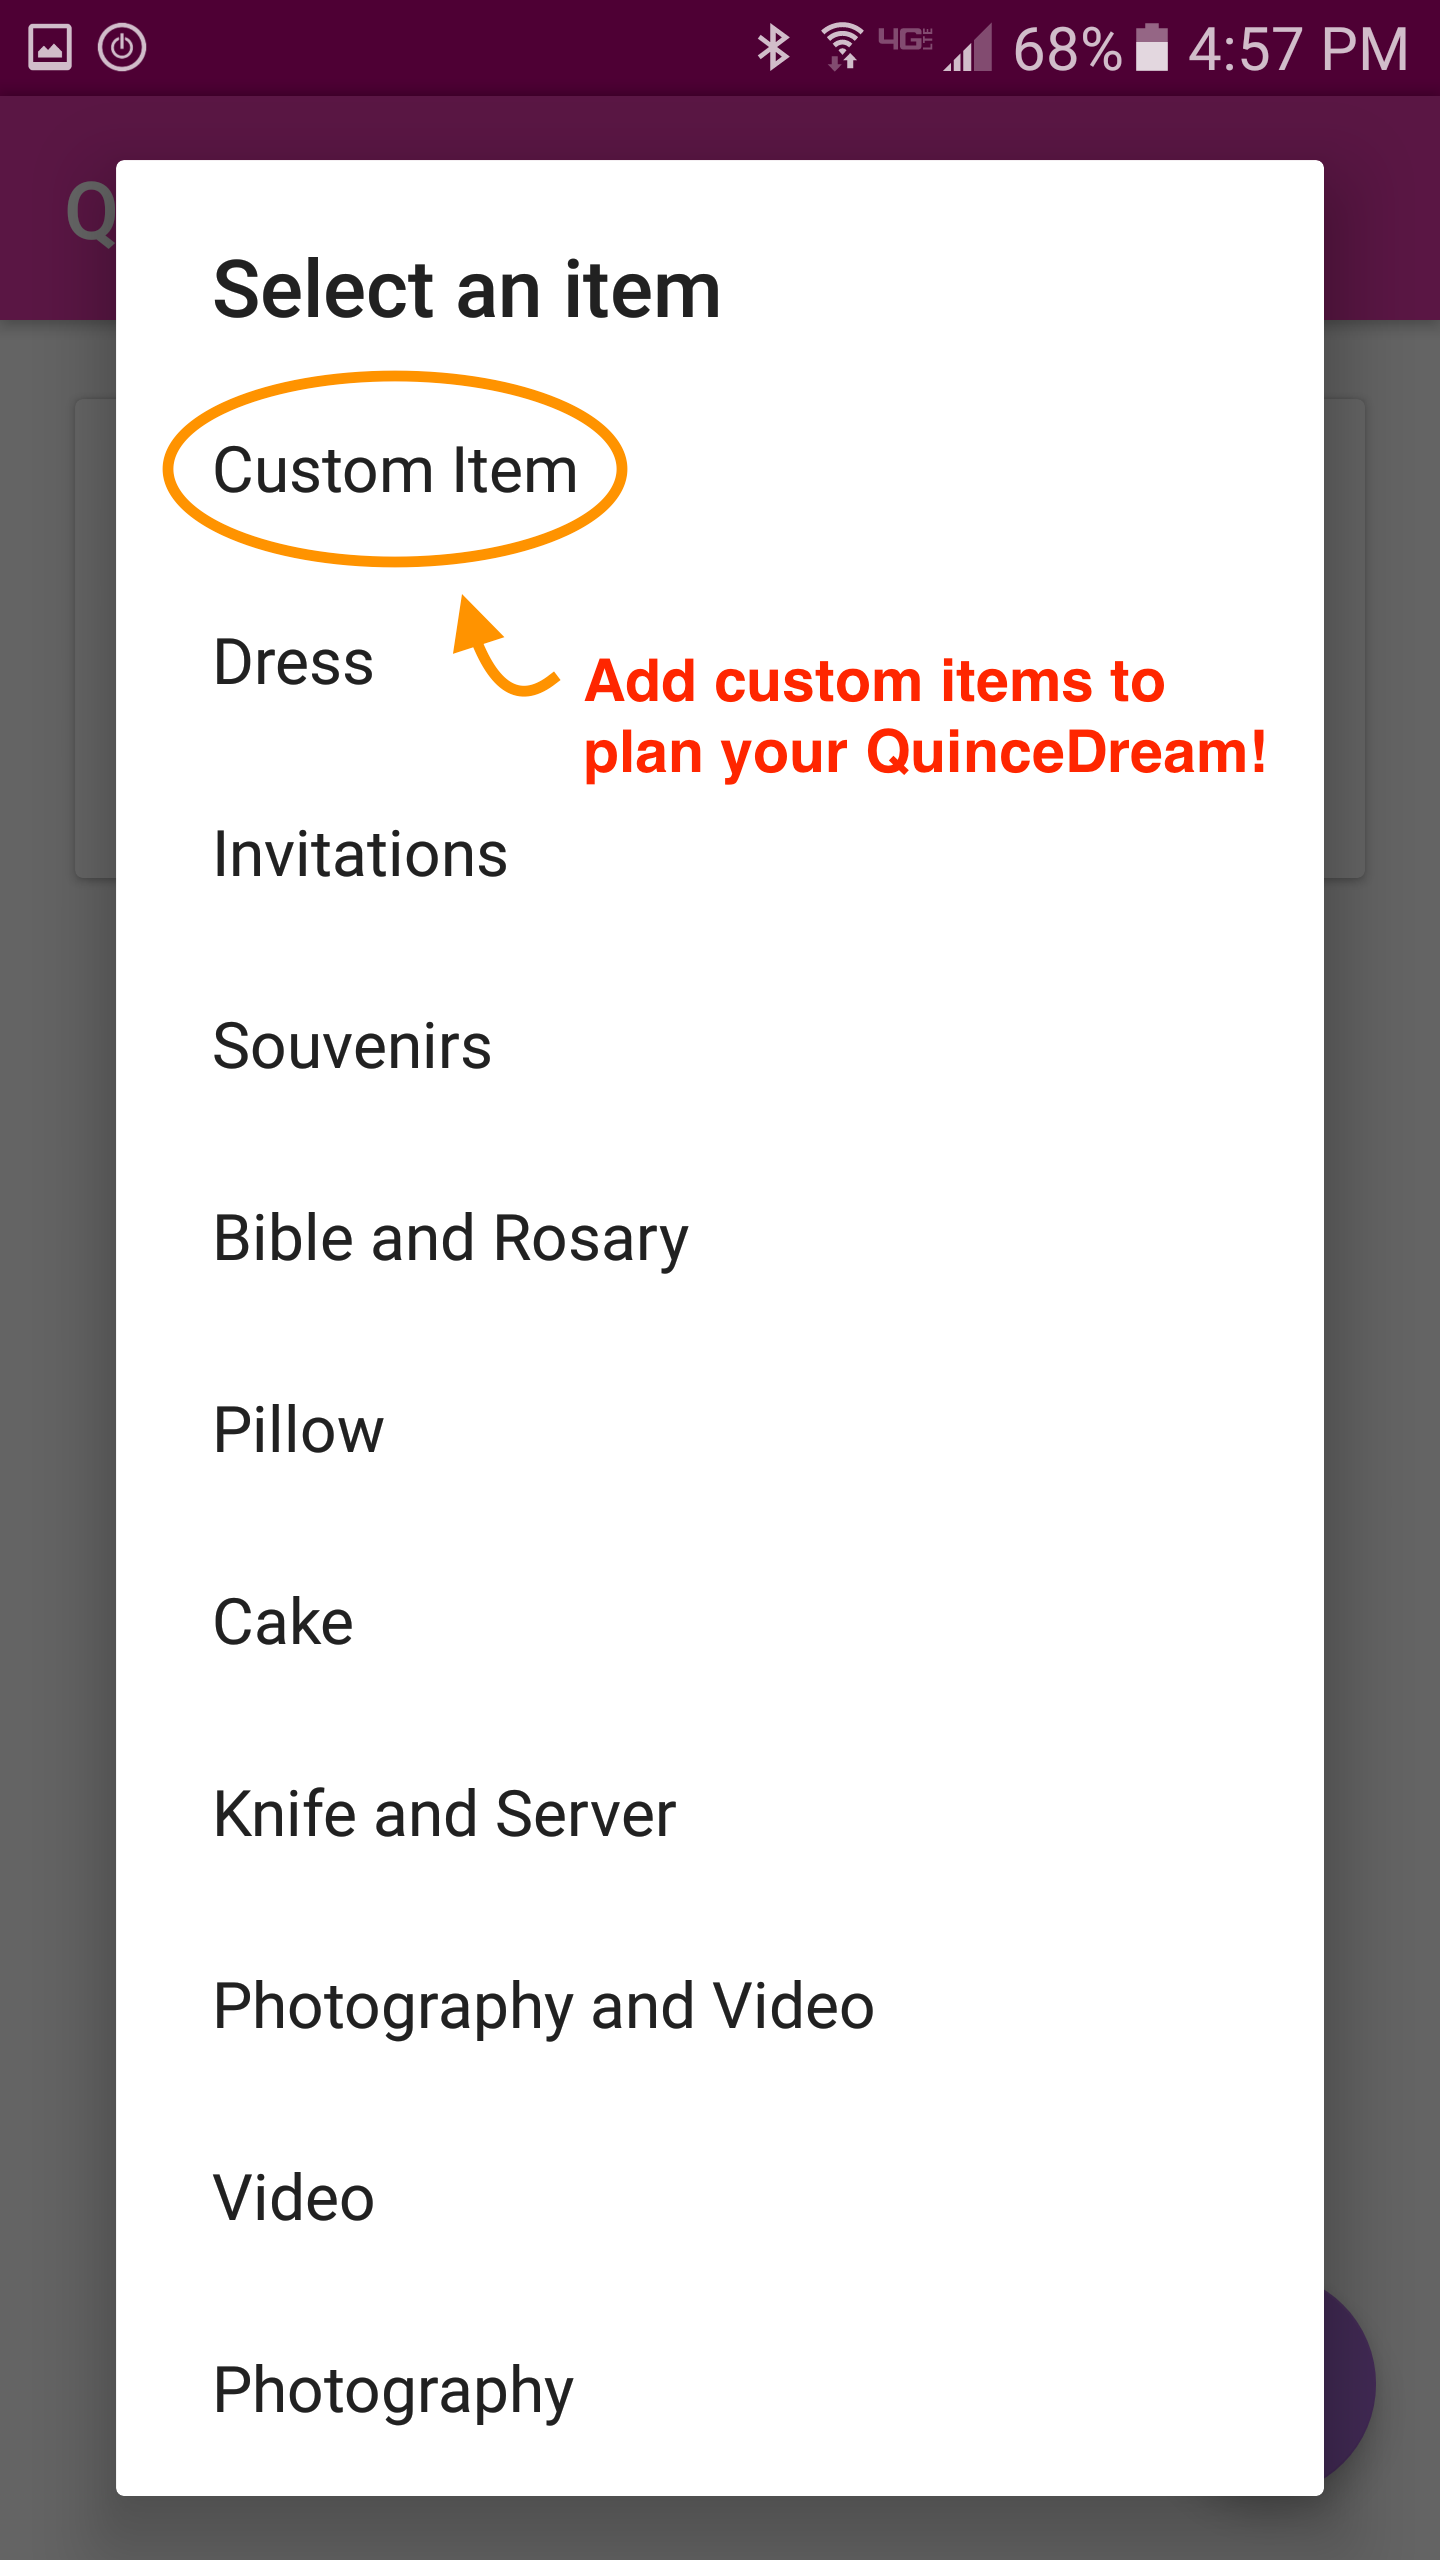 QD Android App Custom Item Selection Preview